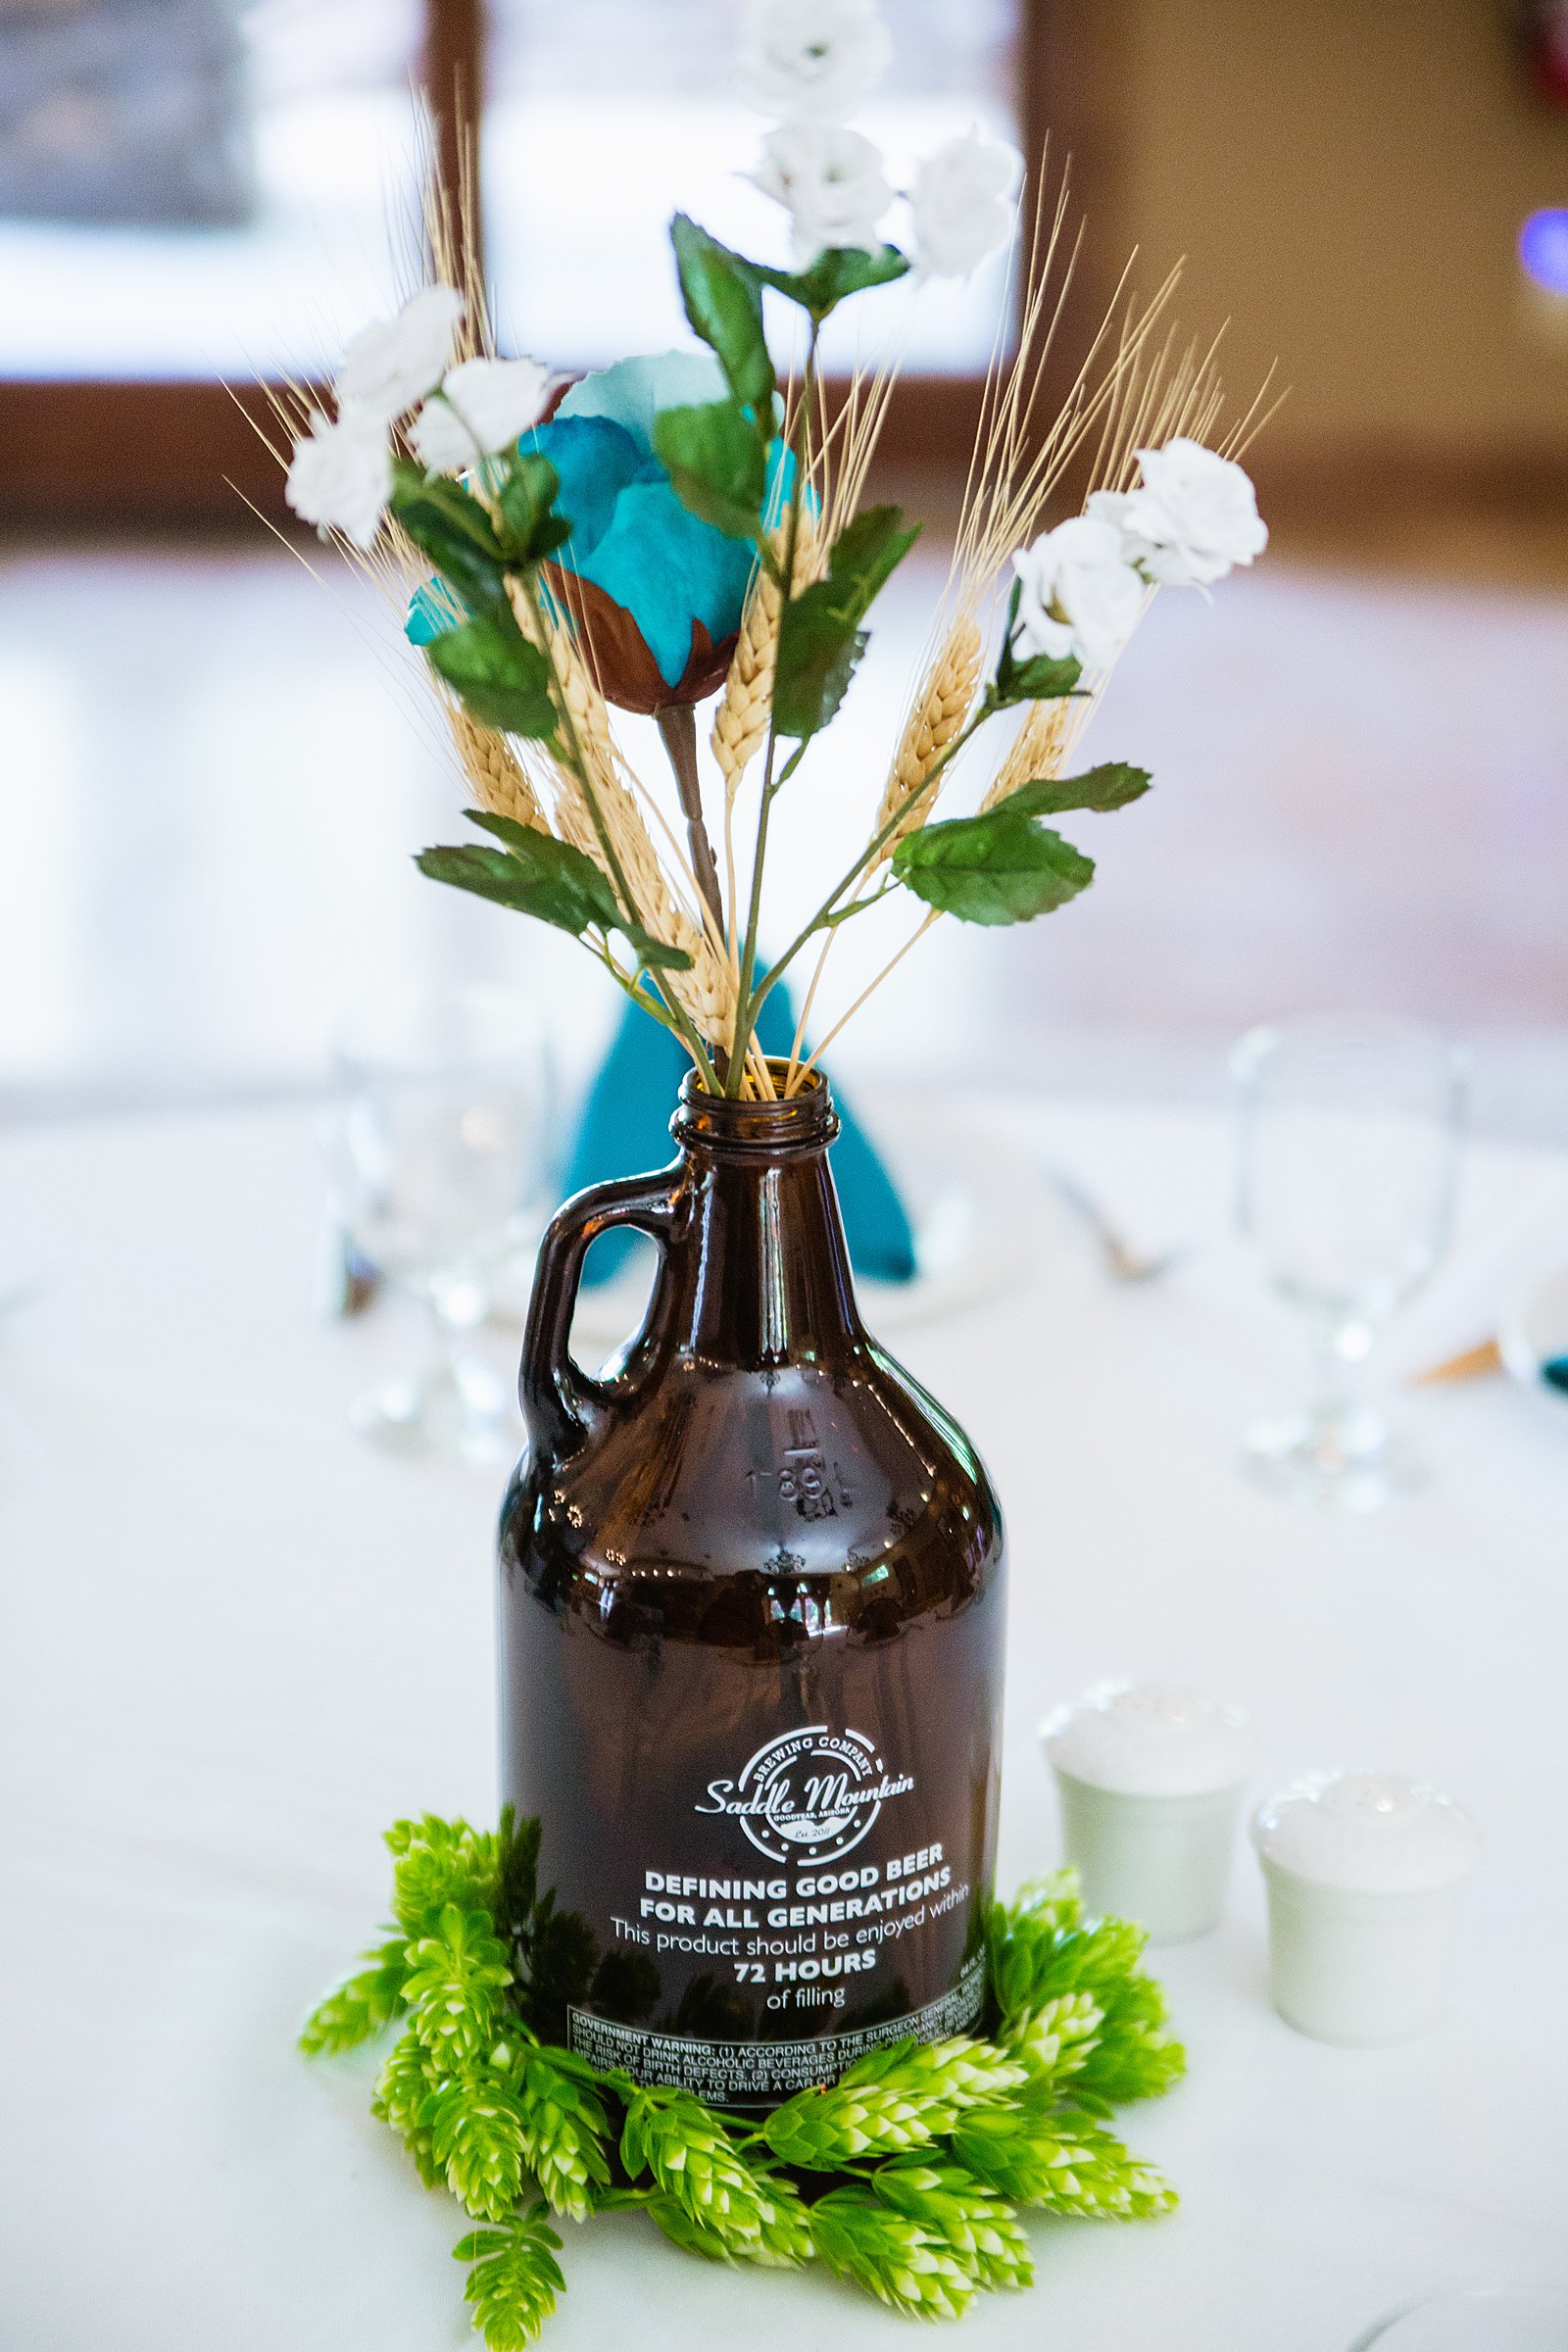 Brewery glass jug centerpieces at The Windmill House wedding reception by Chino Valley wedding photographer PMA Photography.